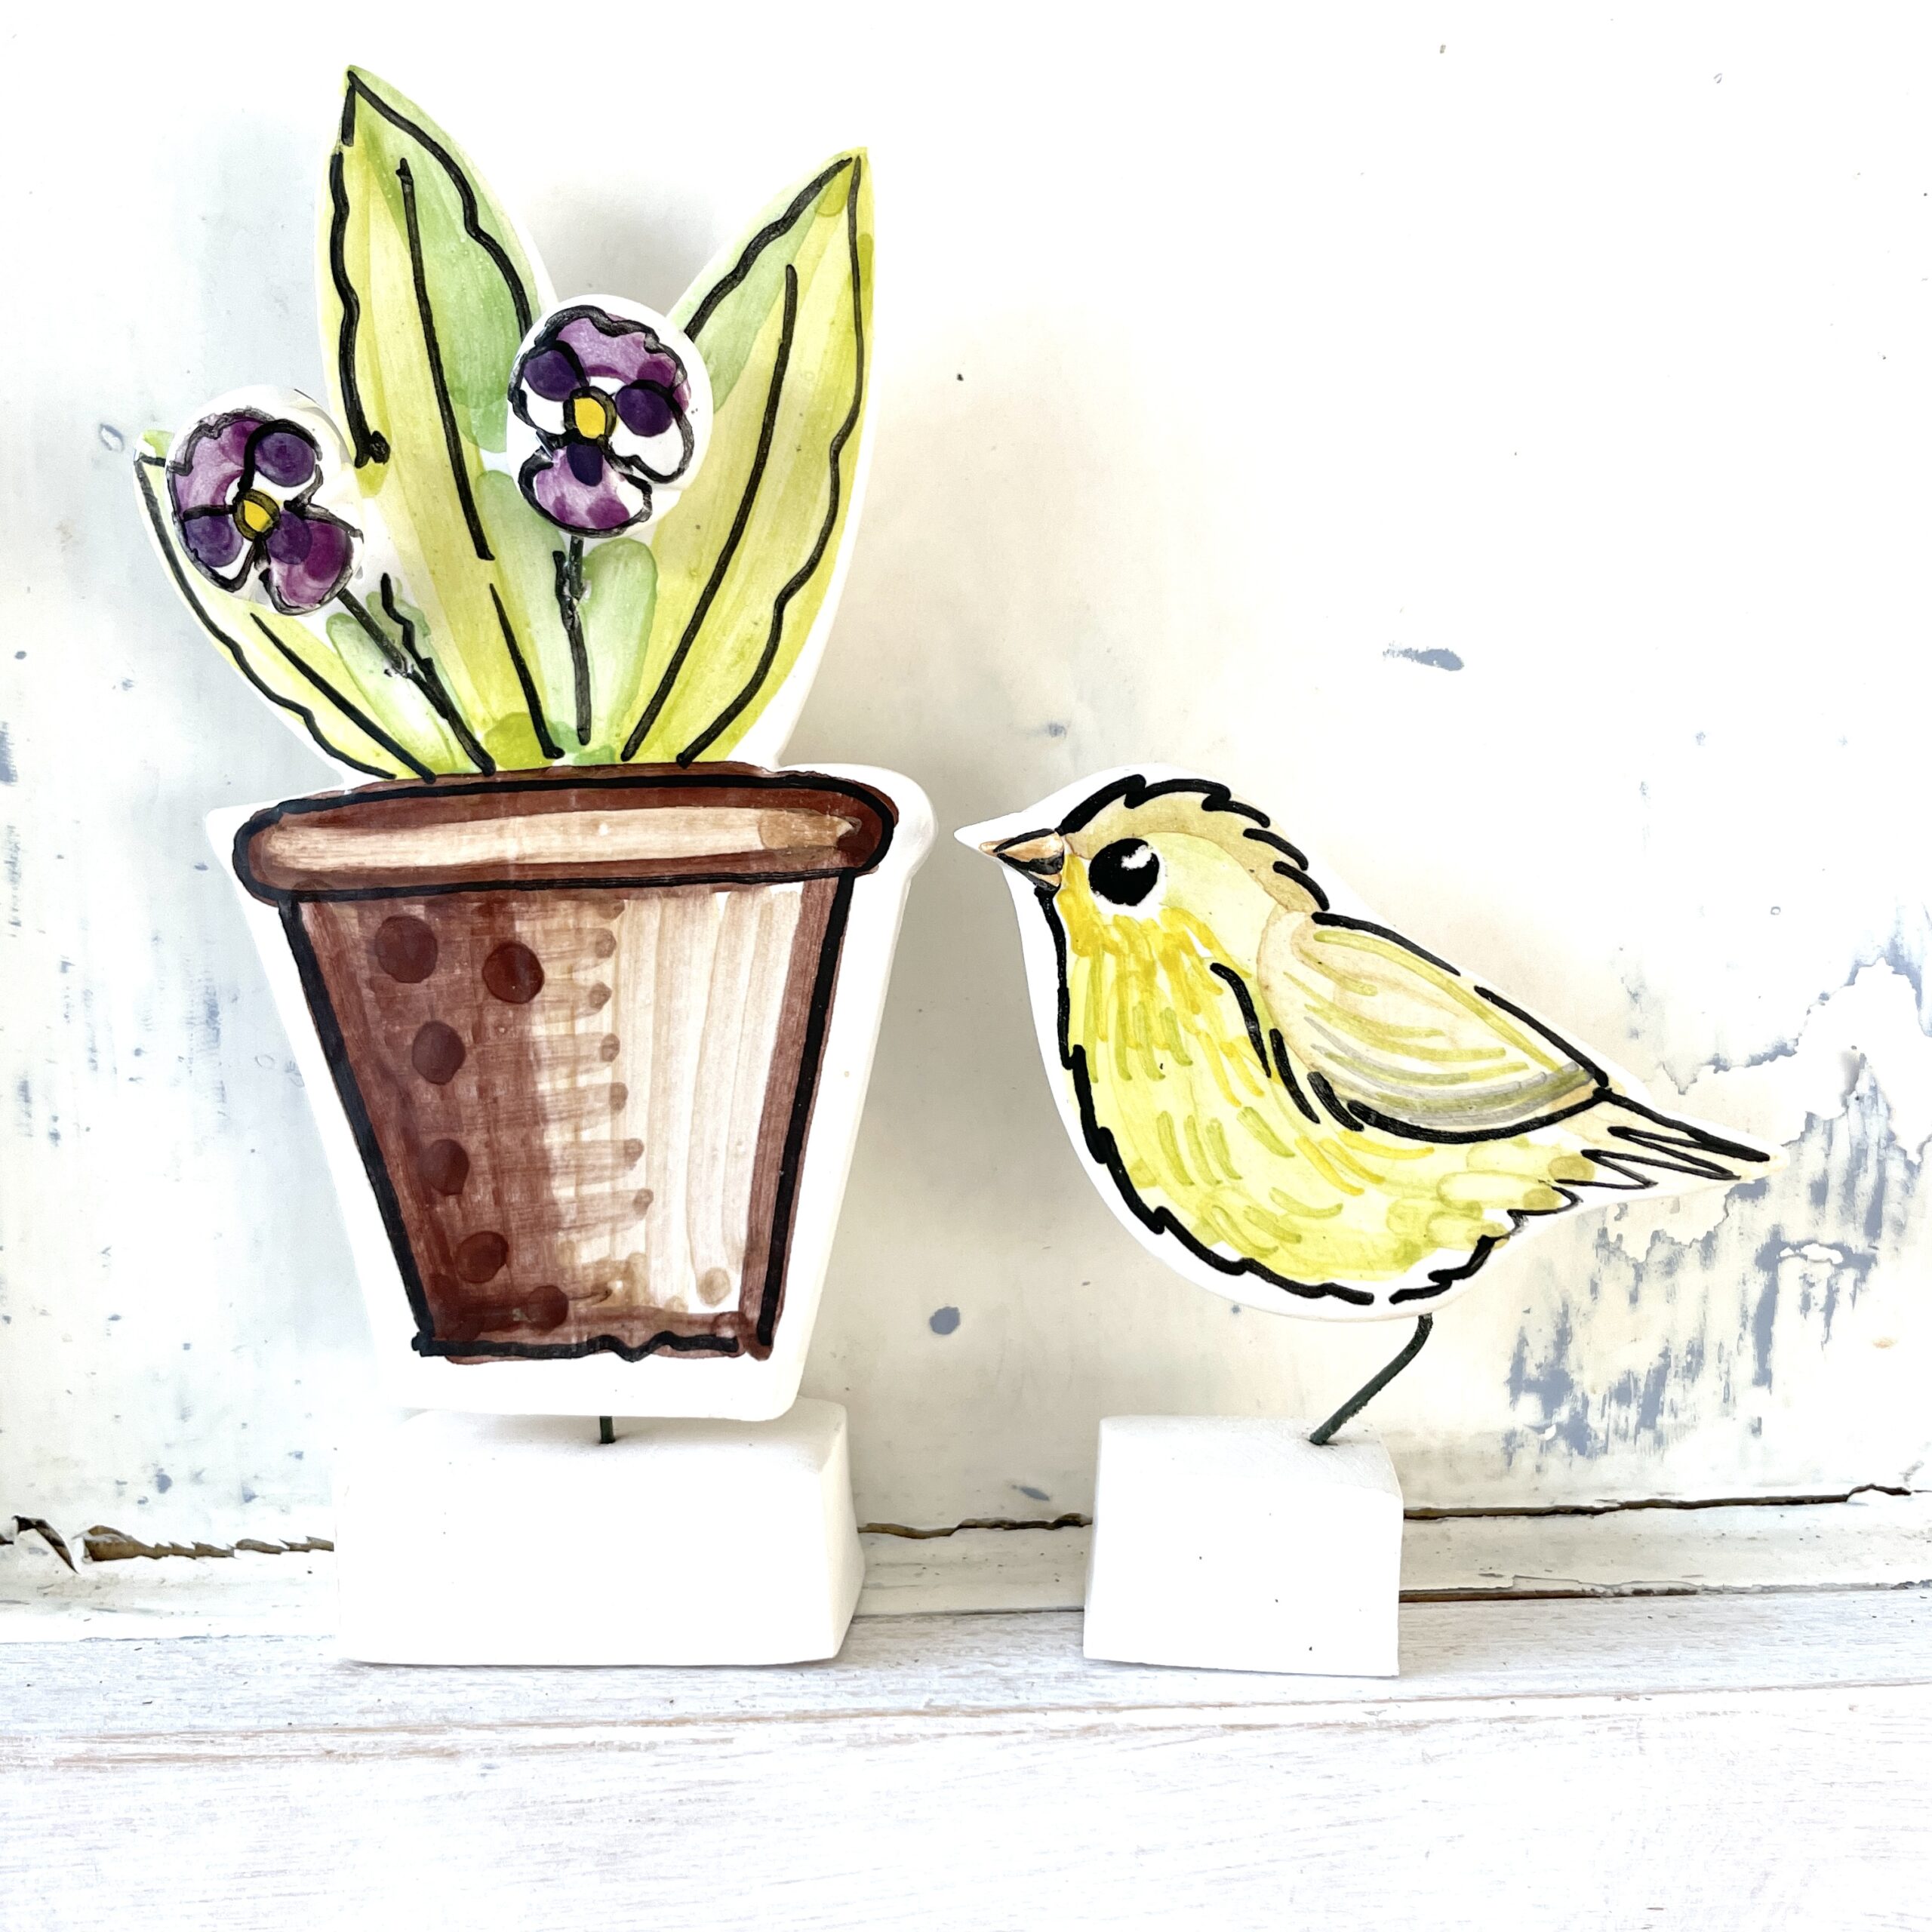 Greenfinch with viola is Louise Crookenden-Johnson